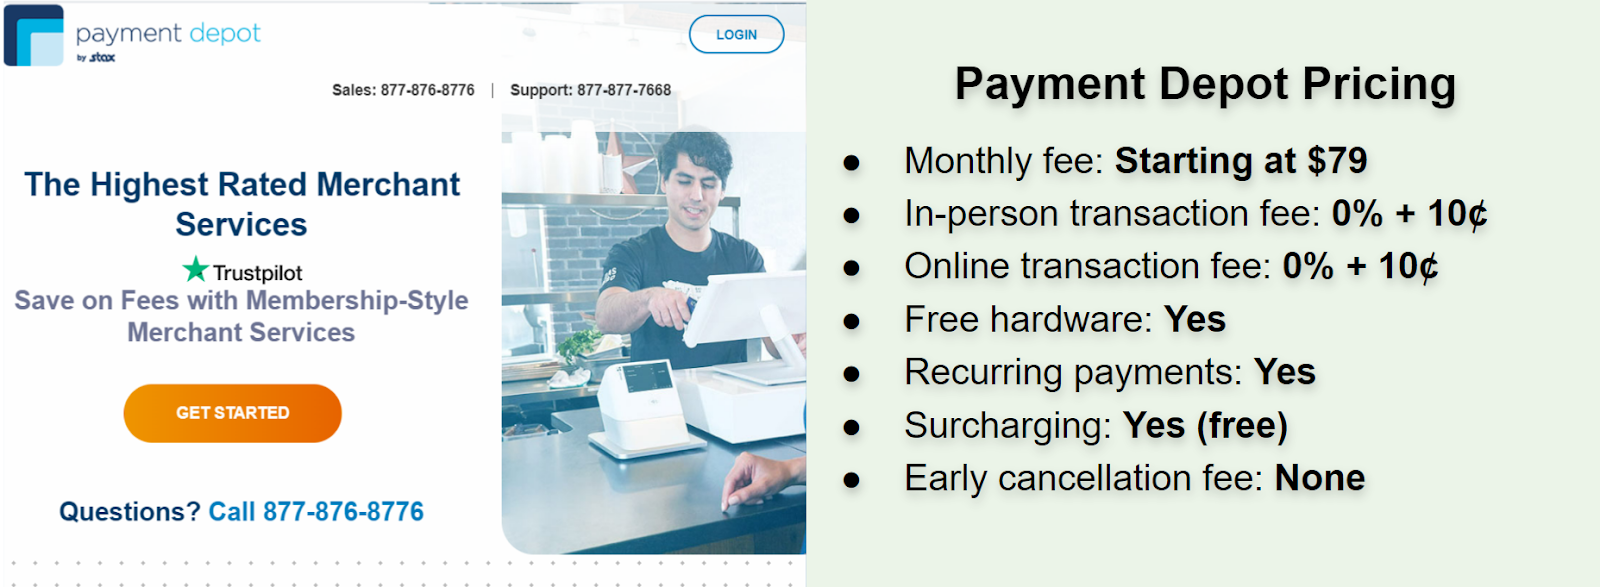 Payment Depot pricing info